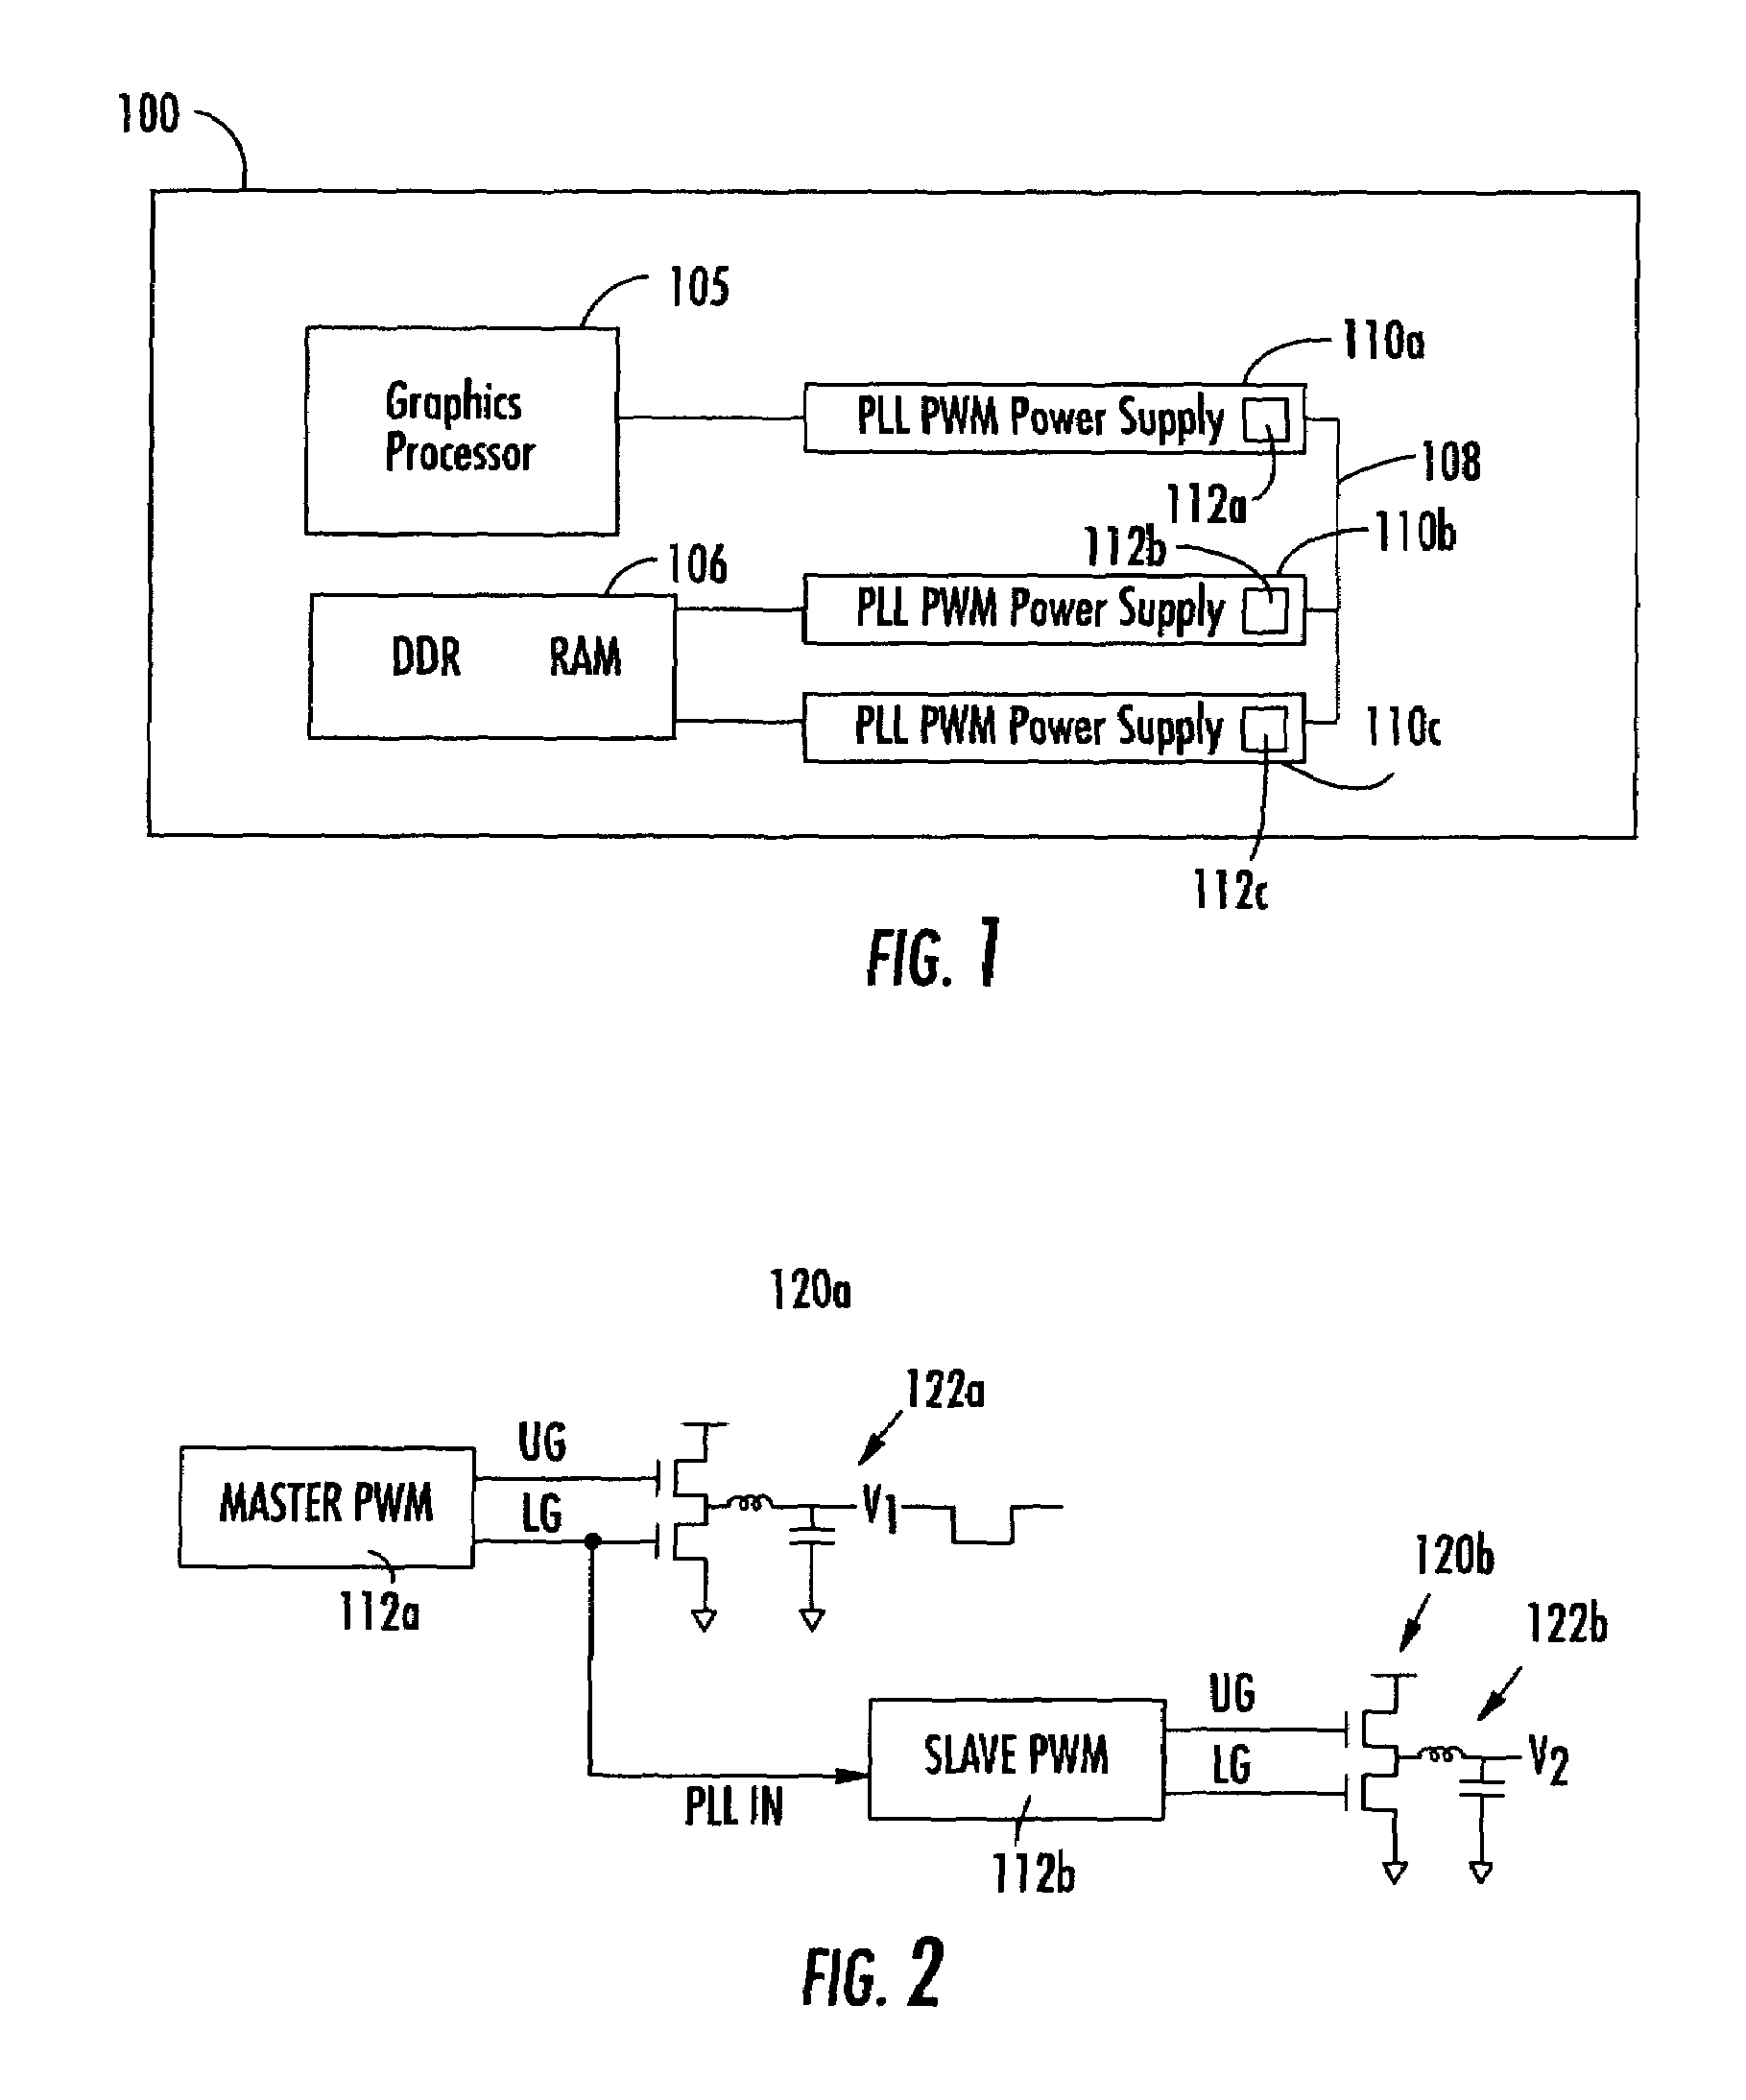 Programmable bandwidth during start-up for phase-lock loop